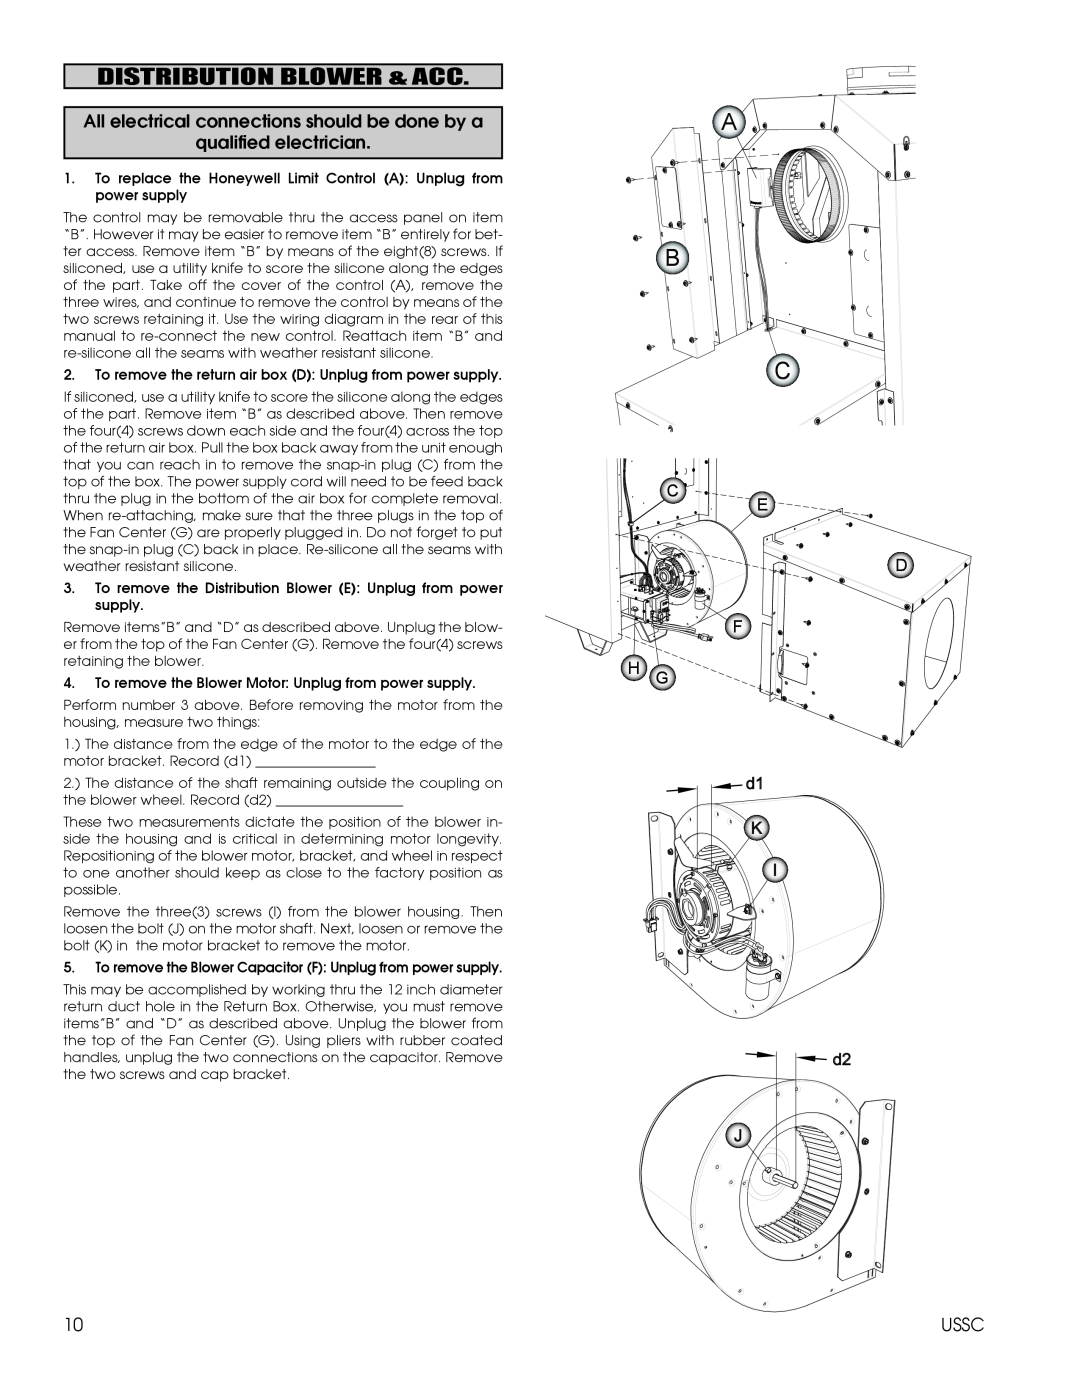 United States Stove 1600EF installation instructions A B C, Distribution Blower & Acc 